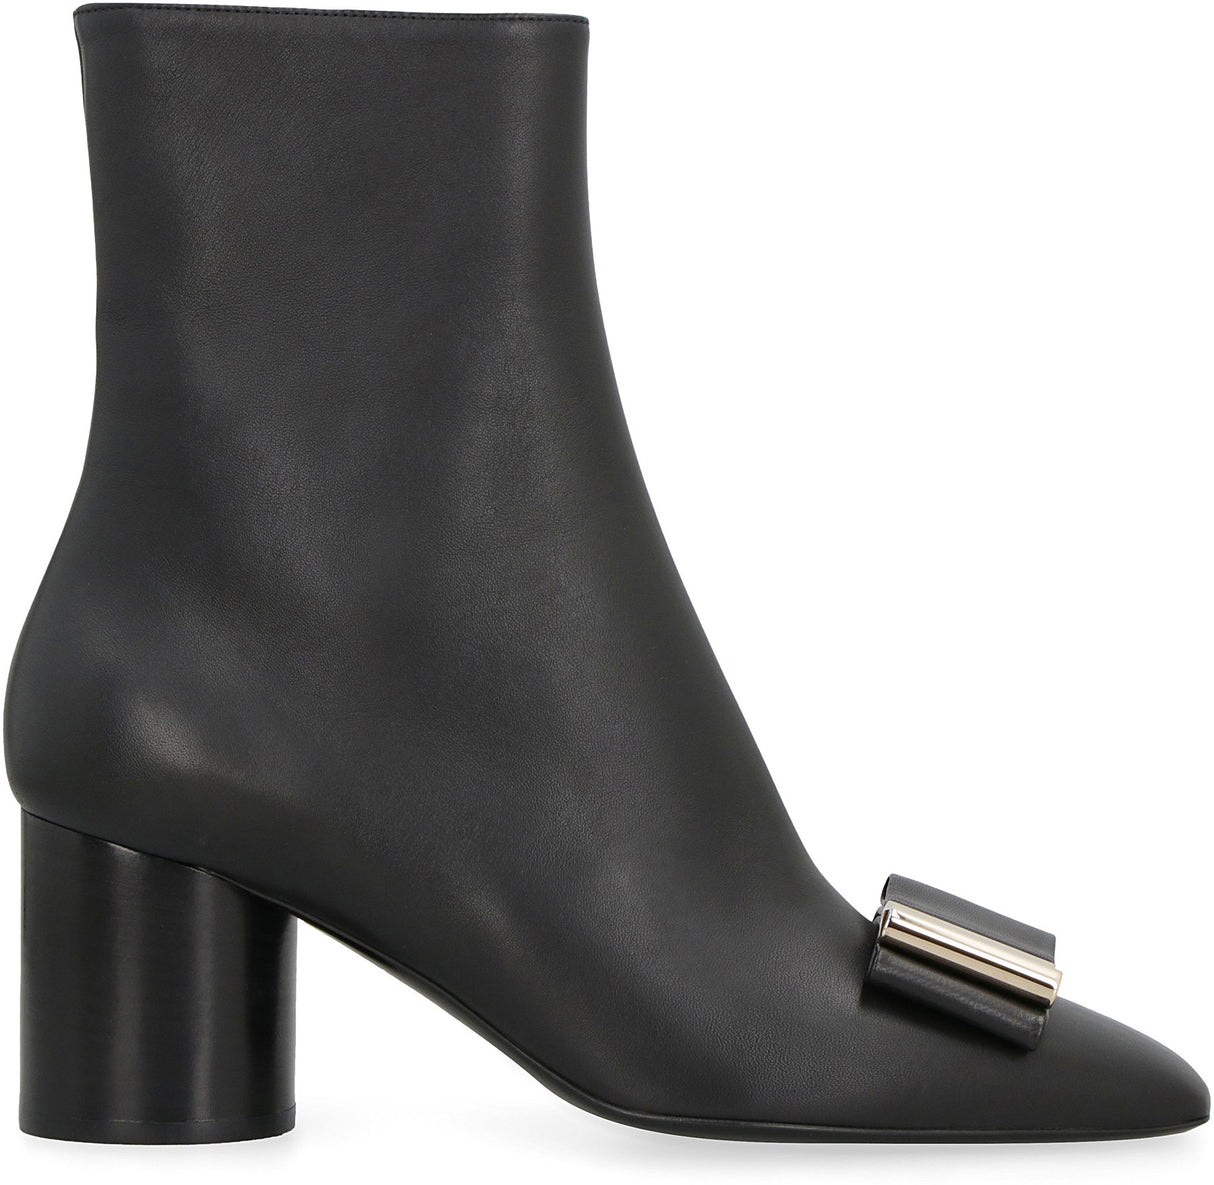 Women's Black Leather Ankle Boots with Vara Front Bow